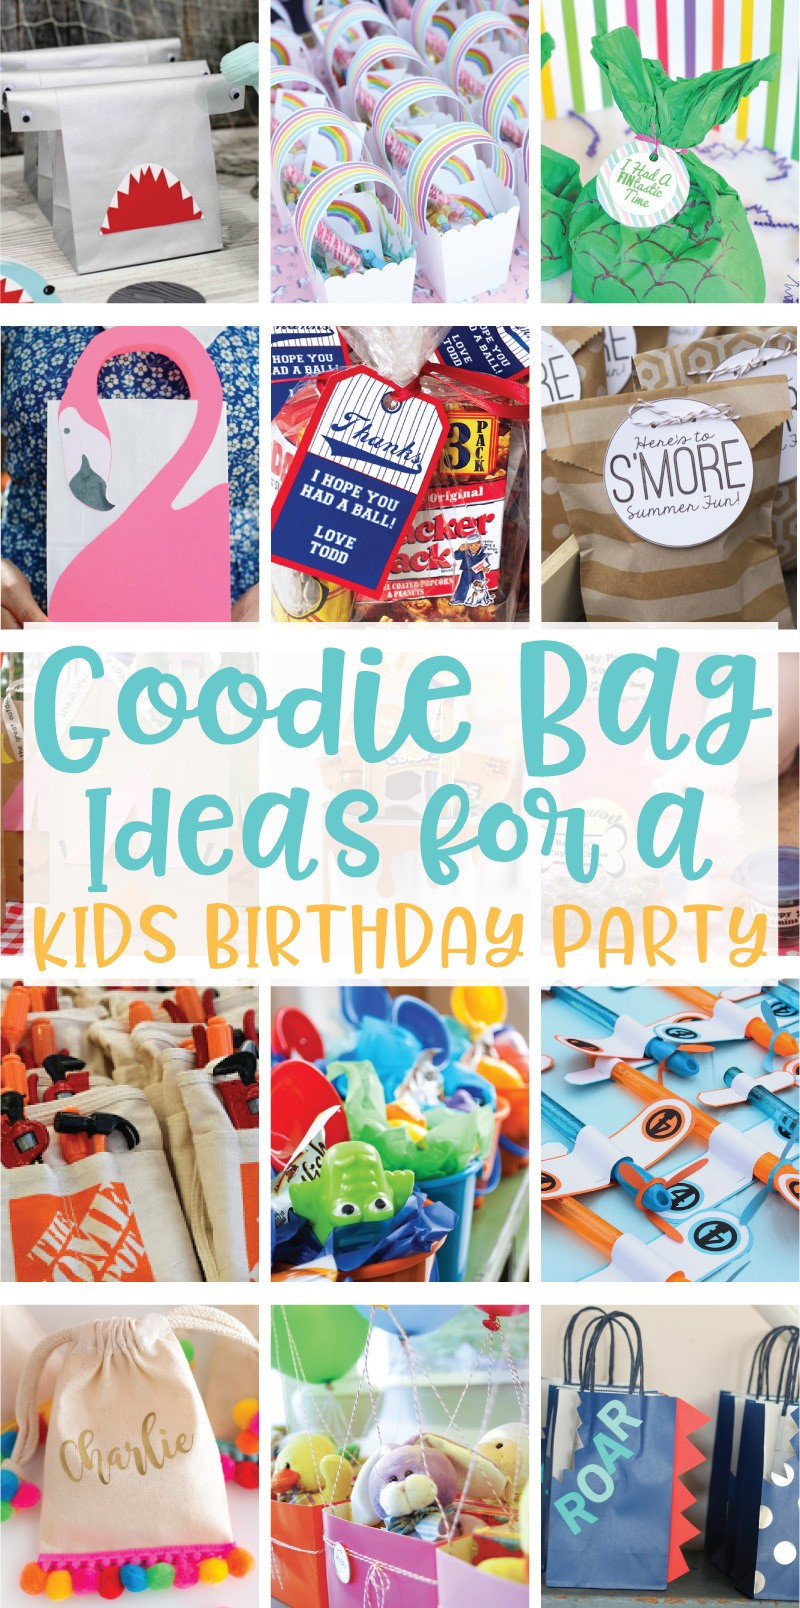 Birthday Party Gift Bags
 20 Creative Goo Bag Ideas for Kids Birthday Parties on